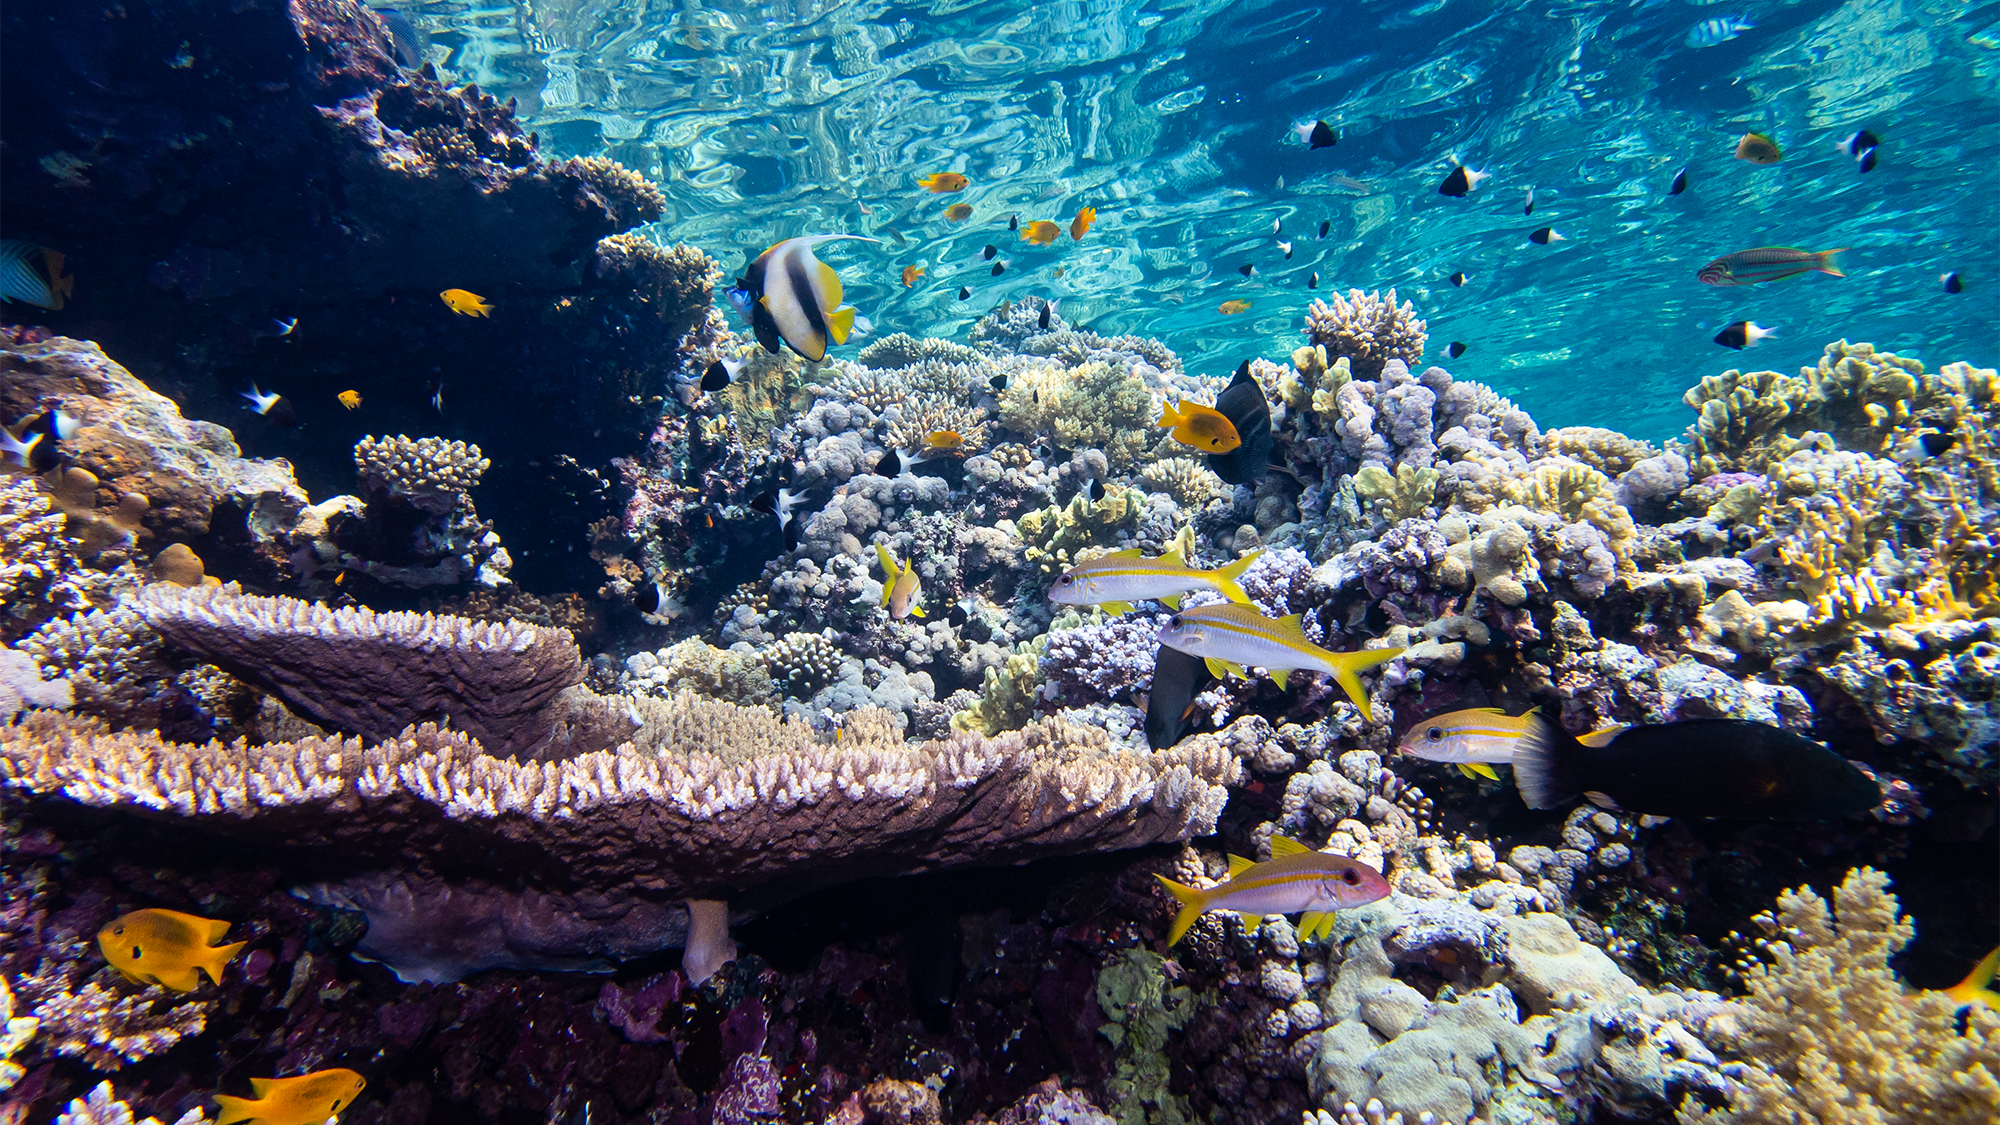 A coral reef in the Gulf of Eilat/Aqaba in the Red Sea. Corals here and in the Persian Gulf are particularly affected by light pollution.